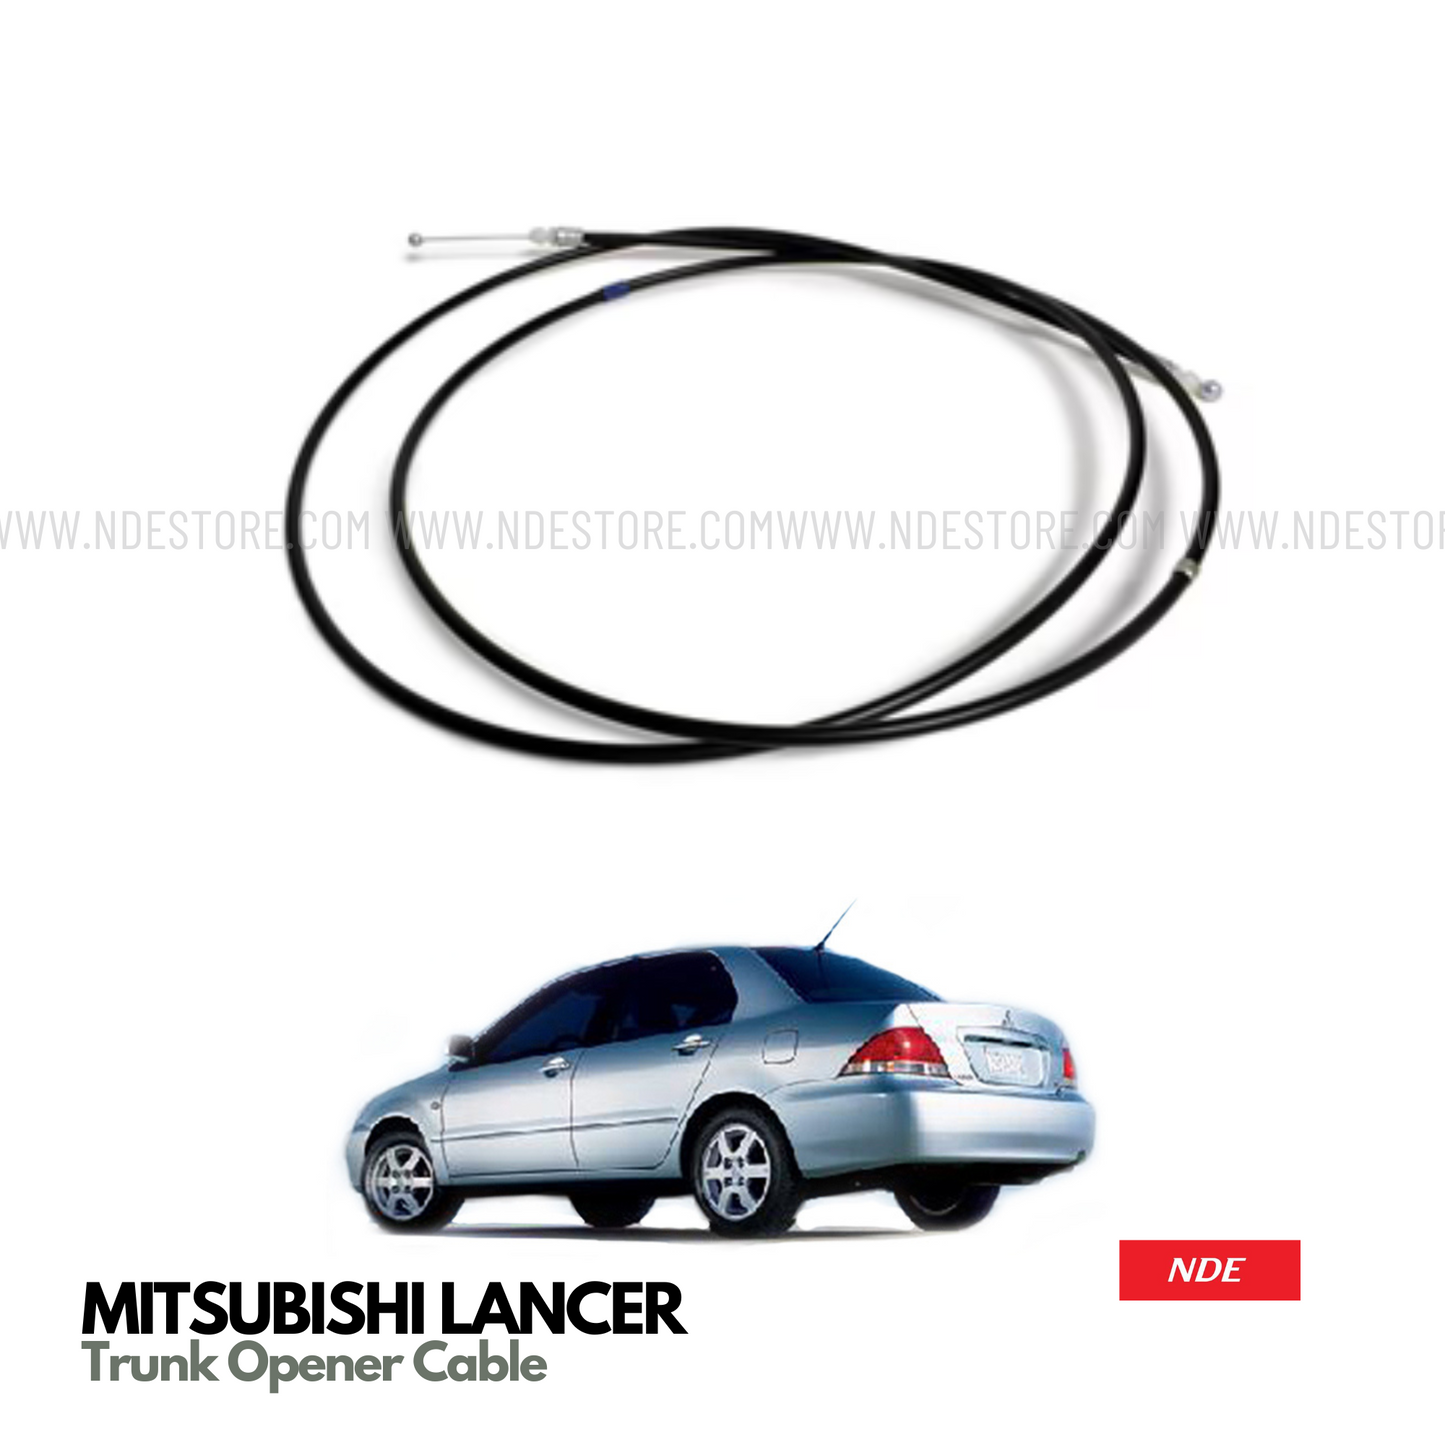 CABLE ASSY, TRUNK OPENER CABLE FOR MITSUBISHI LANCER